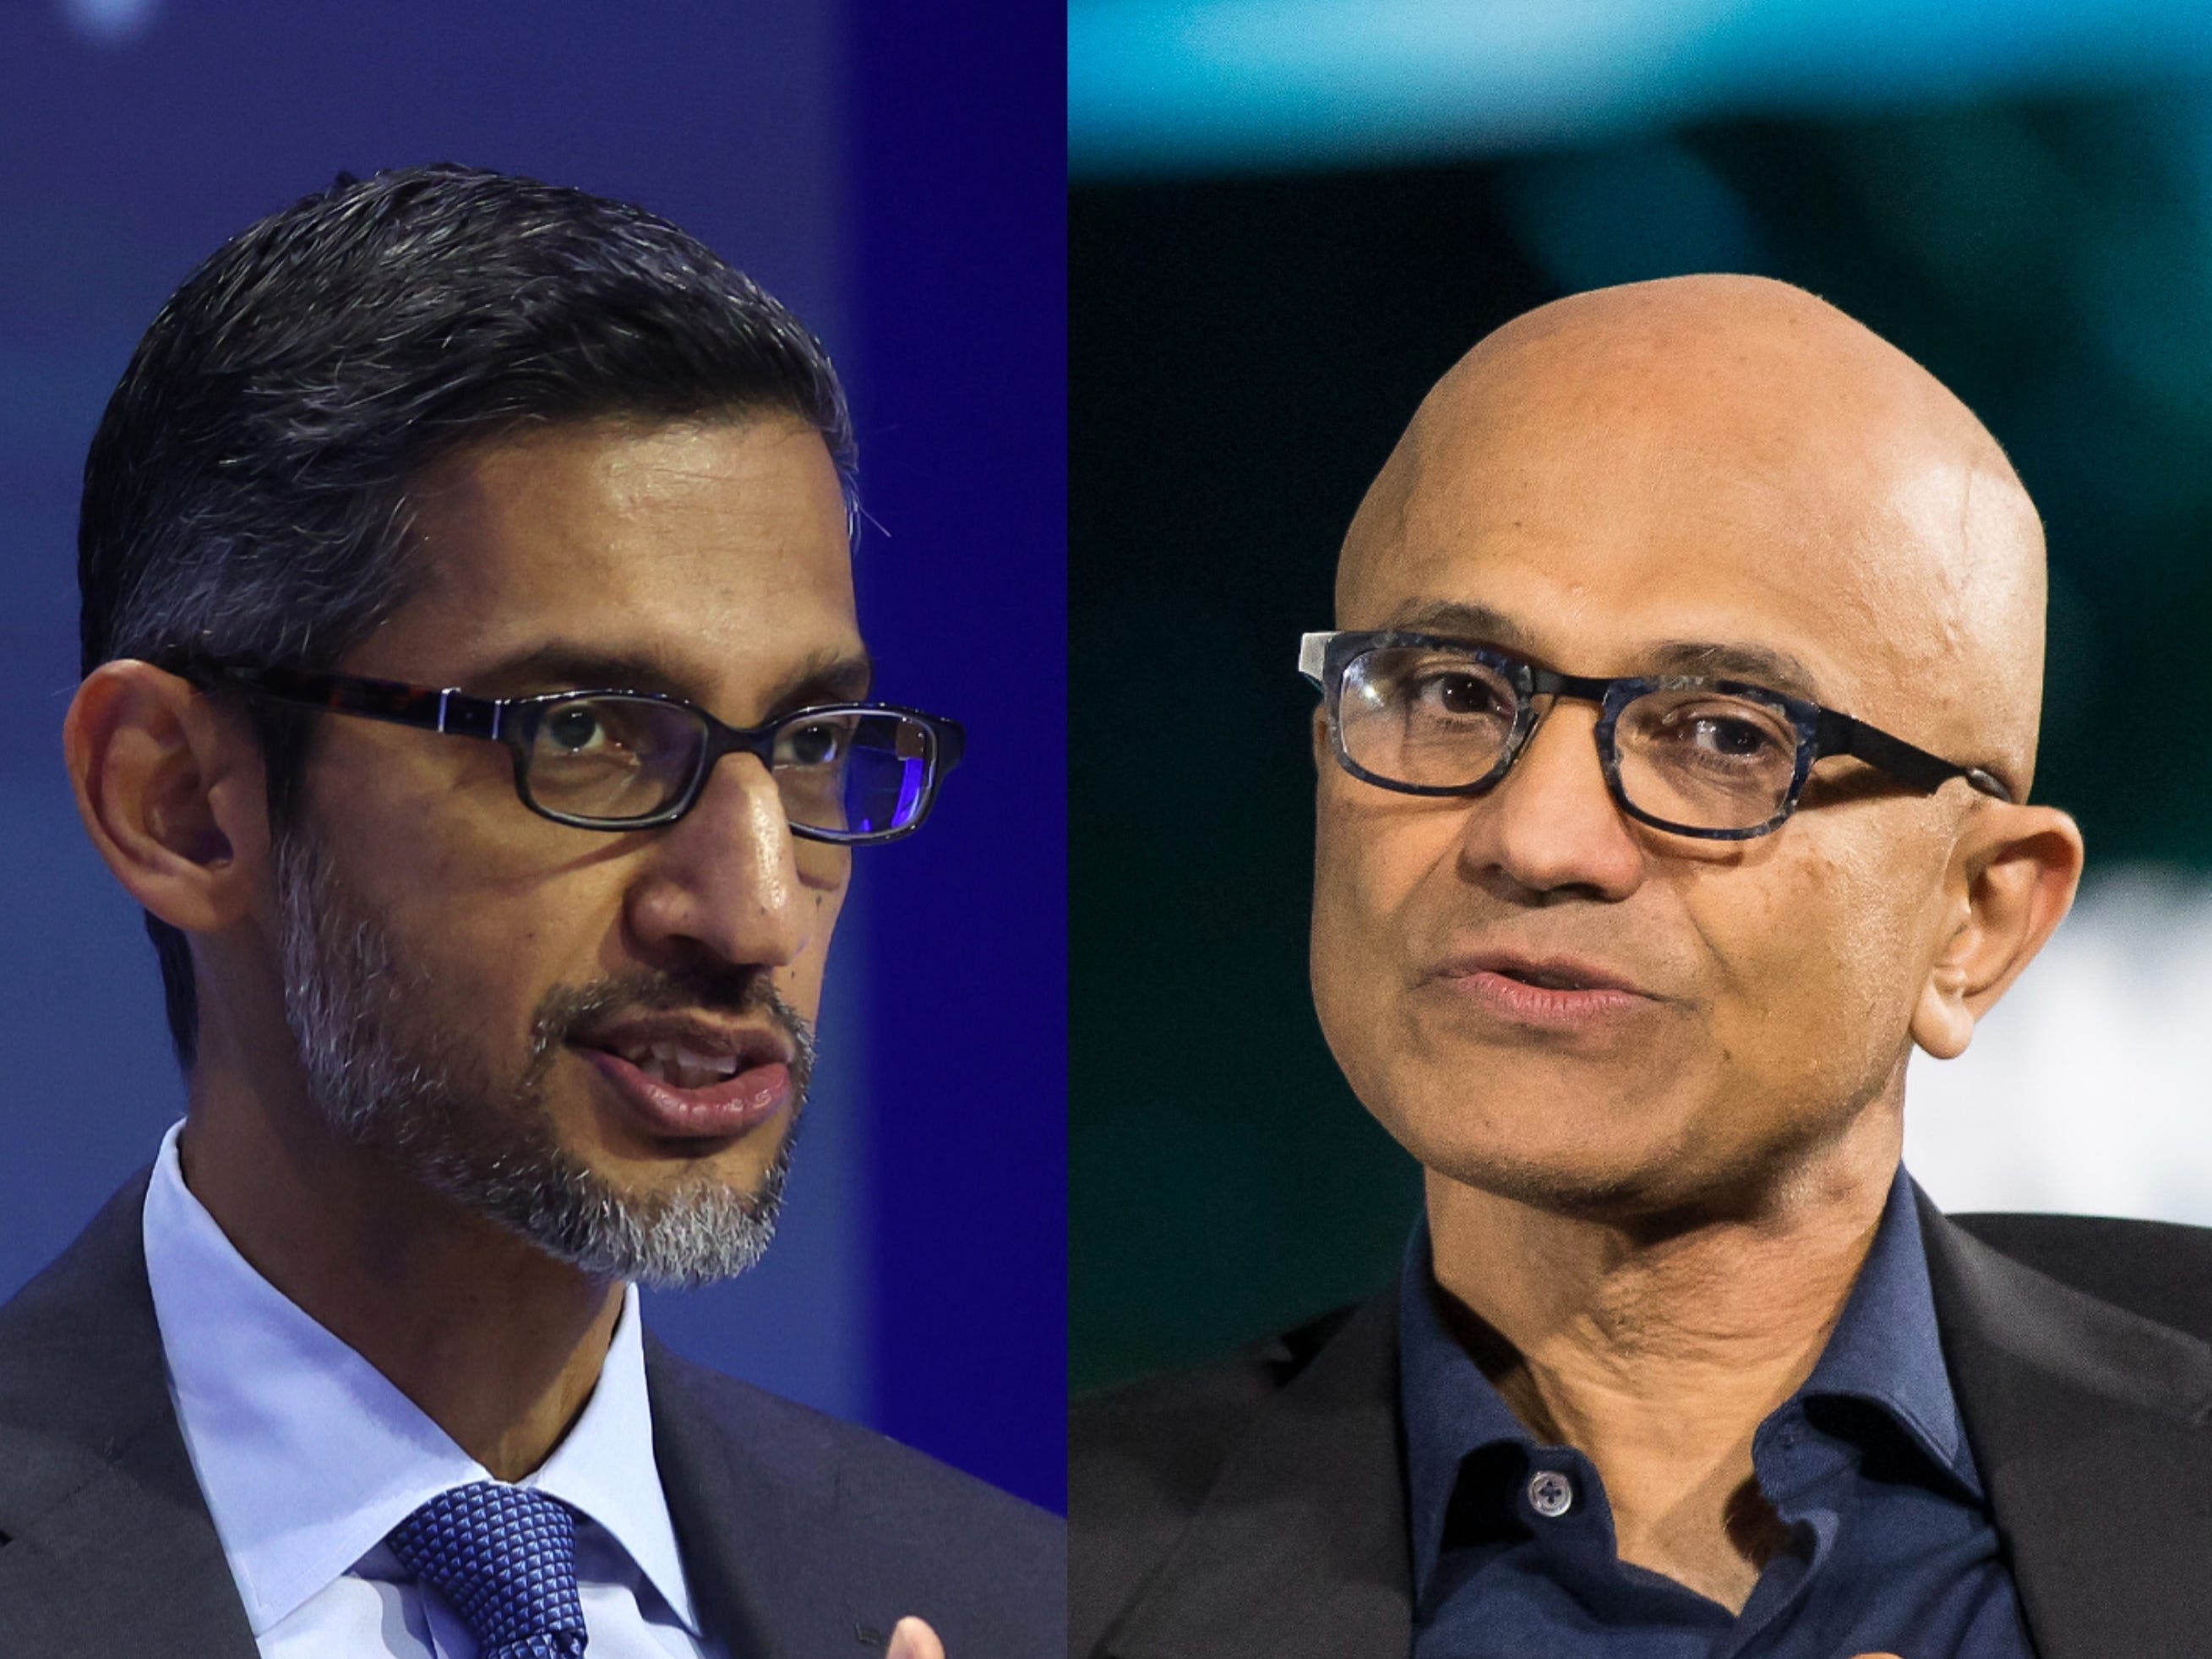 Sundar Pichai claps back at Microsoft's CEO after his comments about making Google 'dance'